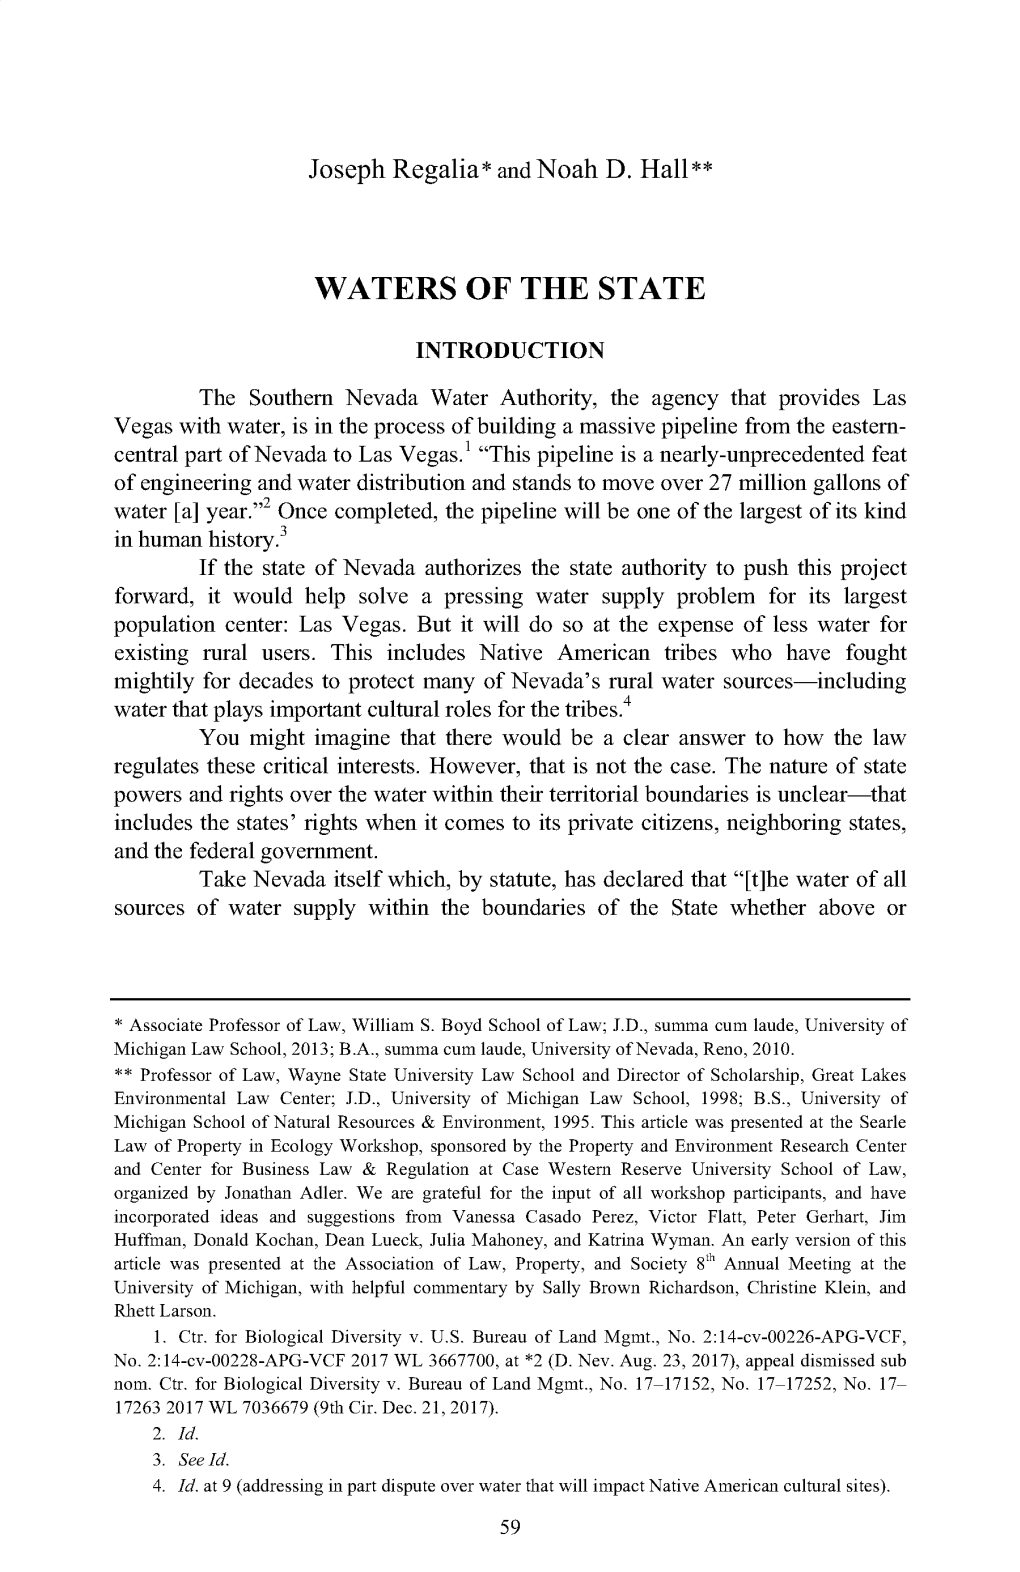 Waters of the State